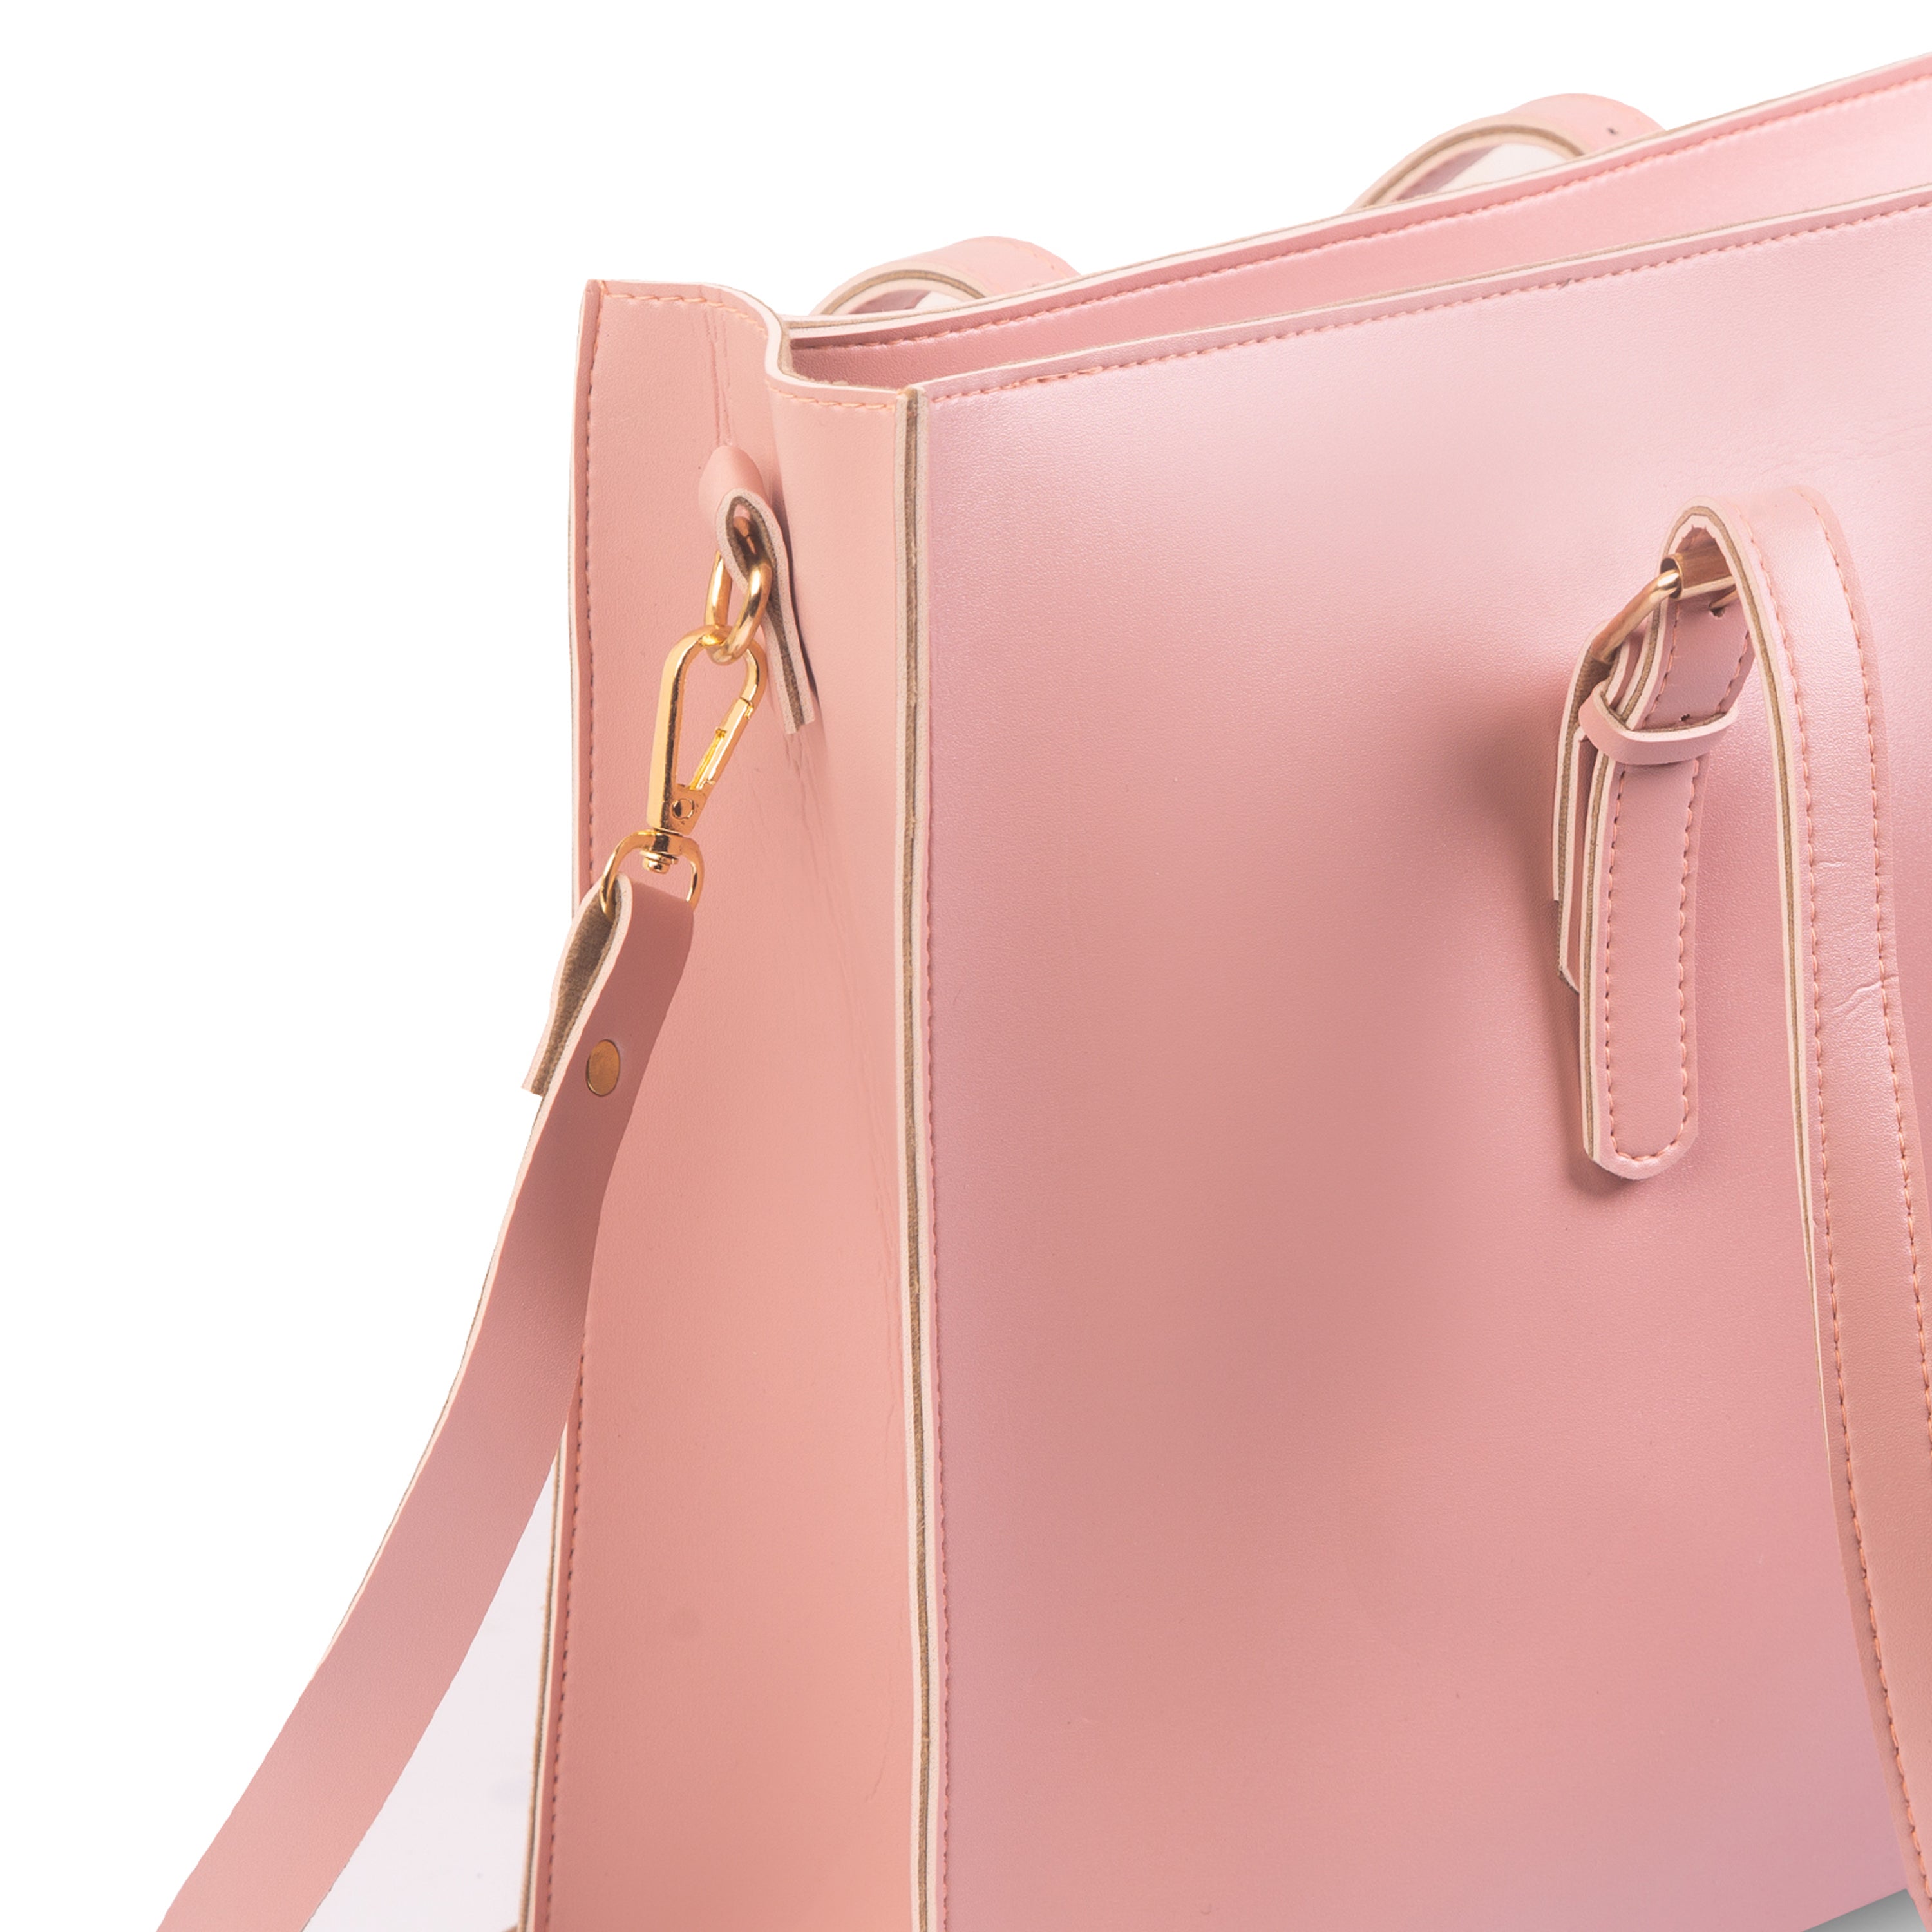 Blossom Pink tote bag